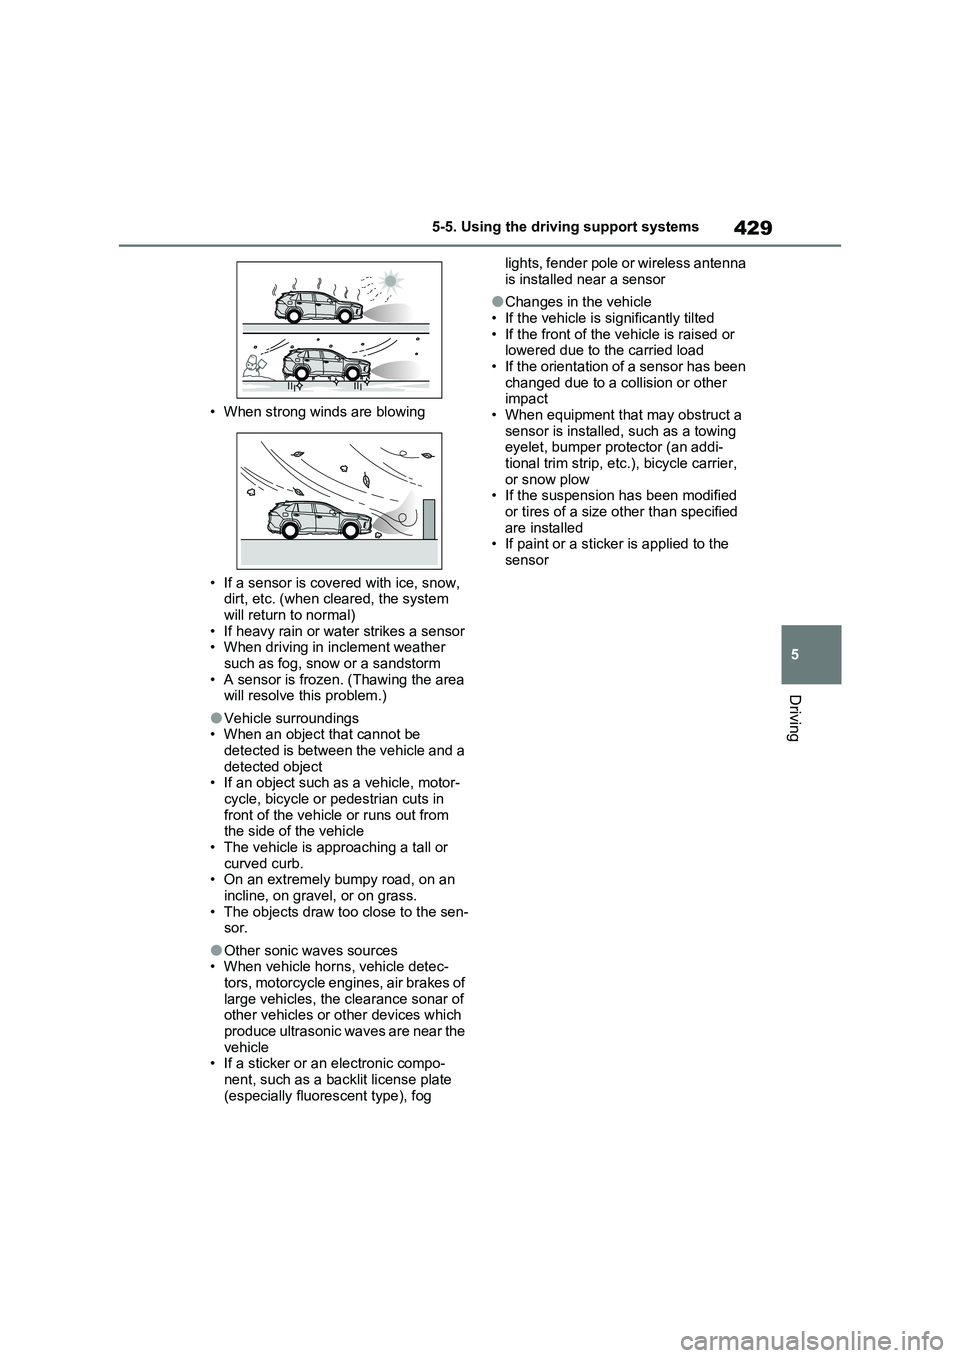 TOYOTA VERSO S 2011  Owners Manual 429
5 5-5. Using the driving support systems
Driving
• When strong winds are blowing
• If a sensor is covered with ice, snow, 
dirt, etc. (when cleared, the system 
will return to normal)
• If h